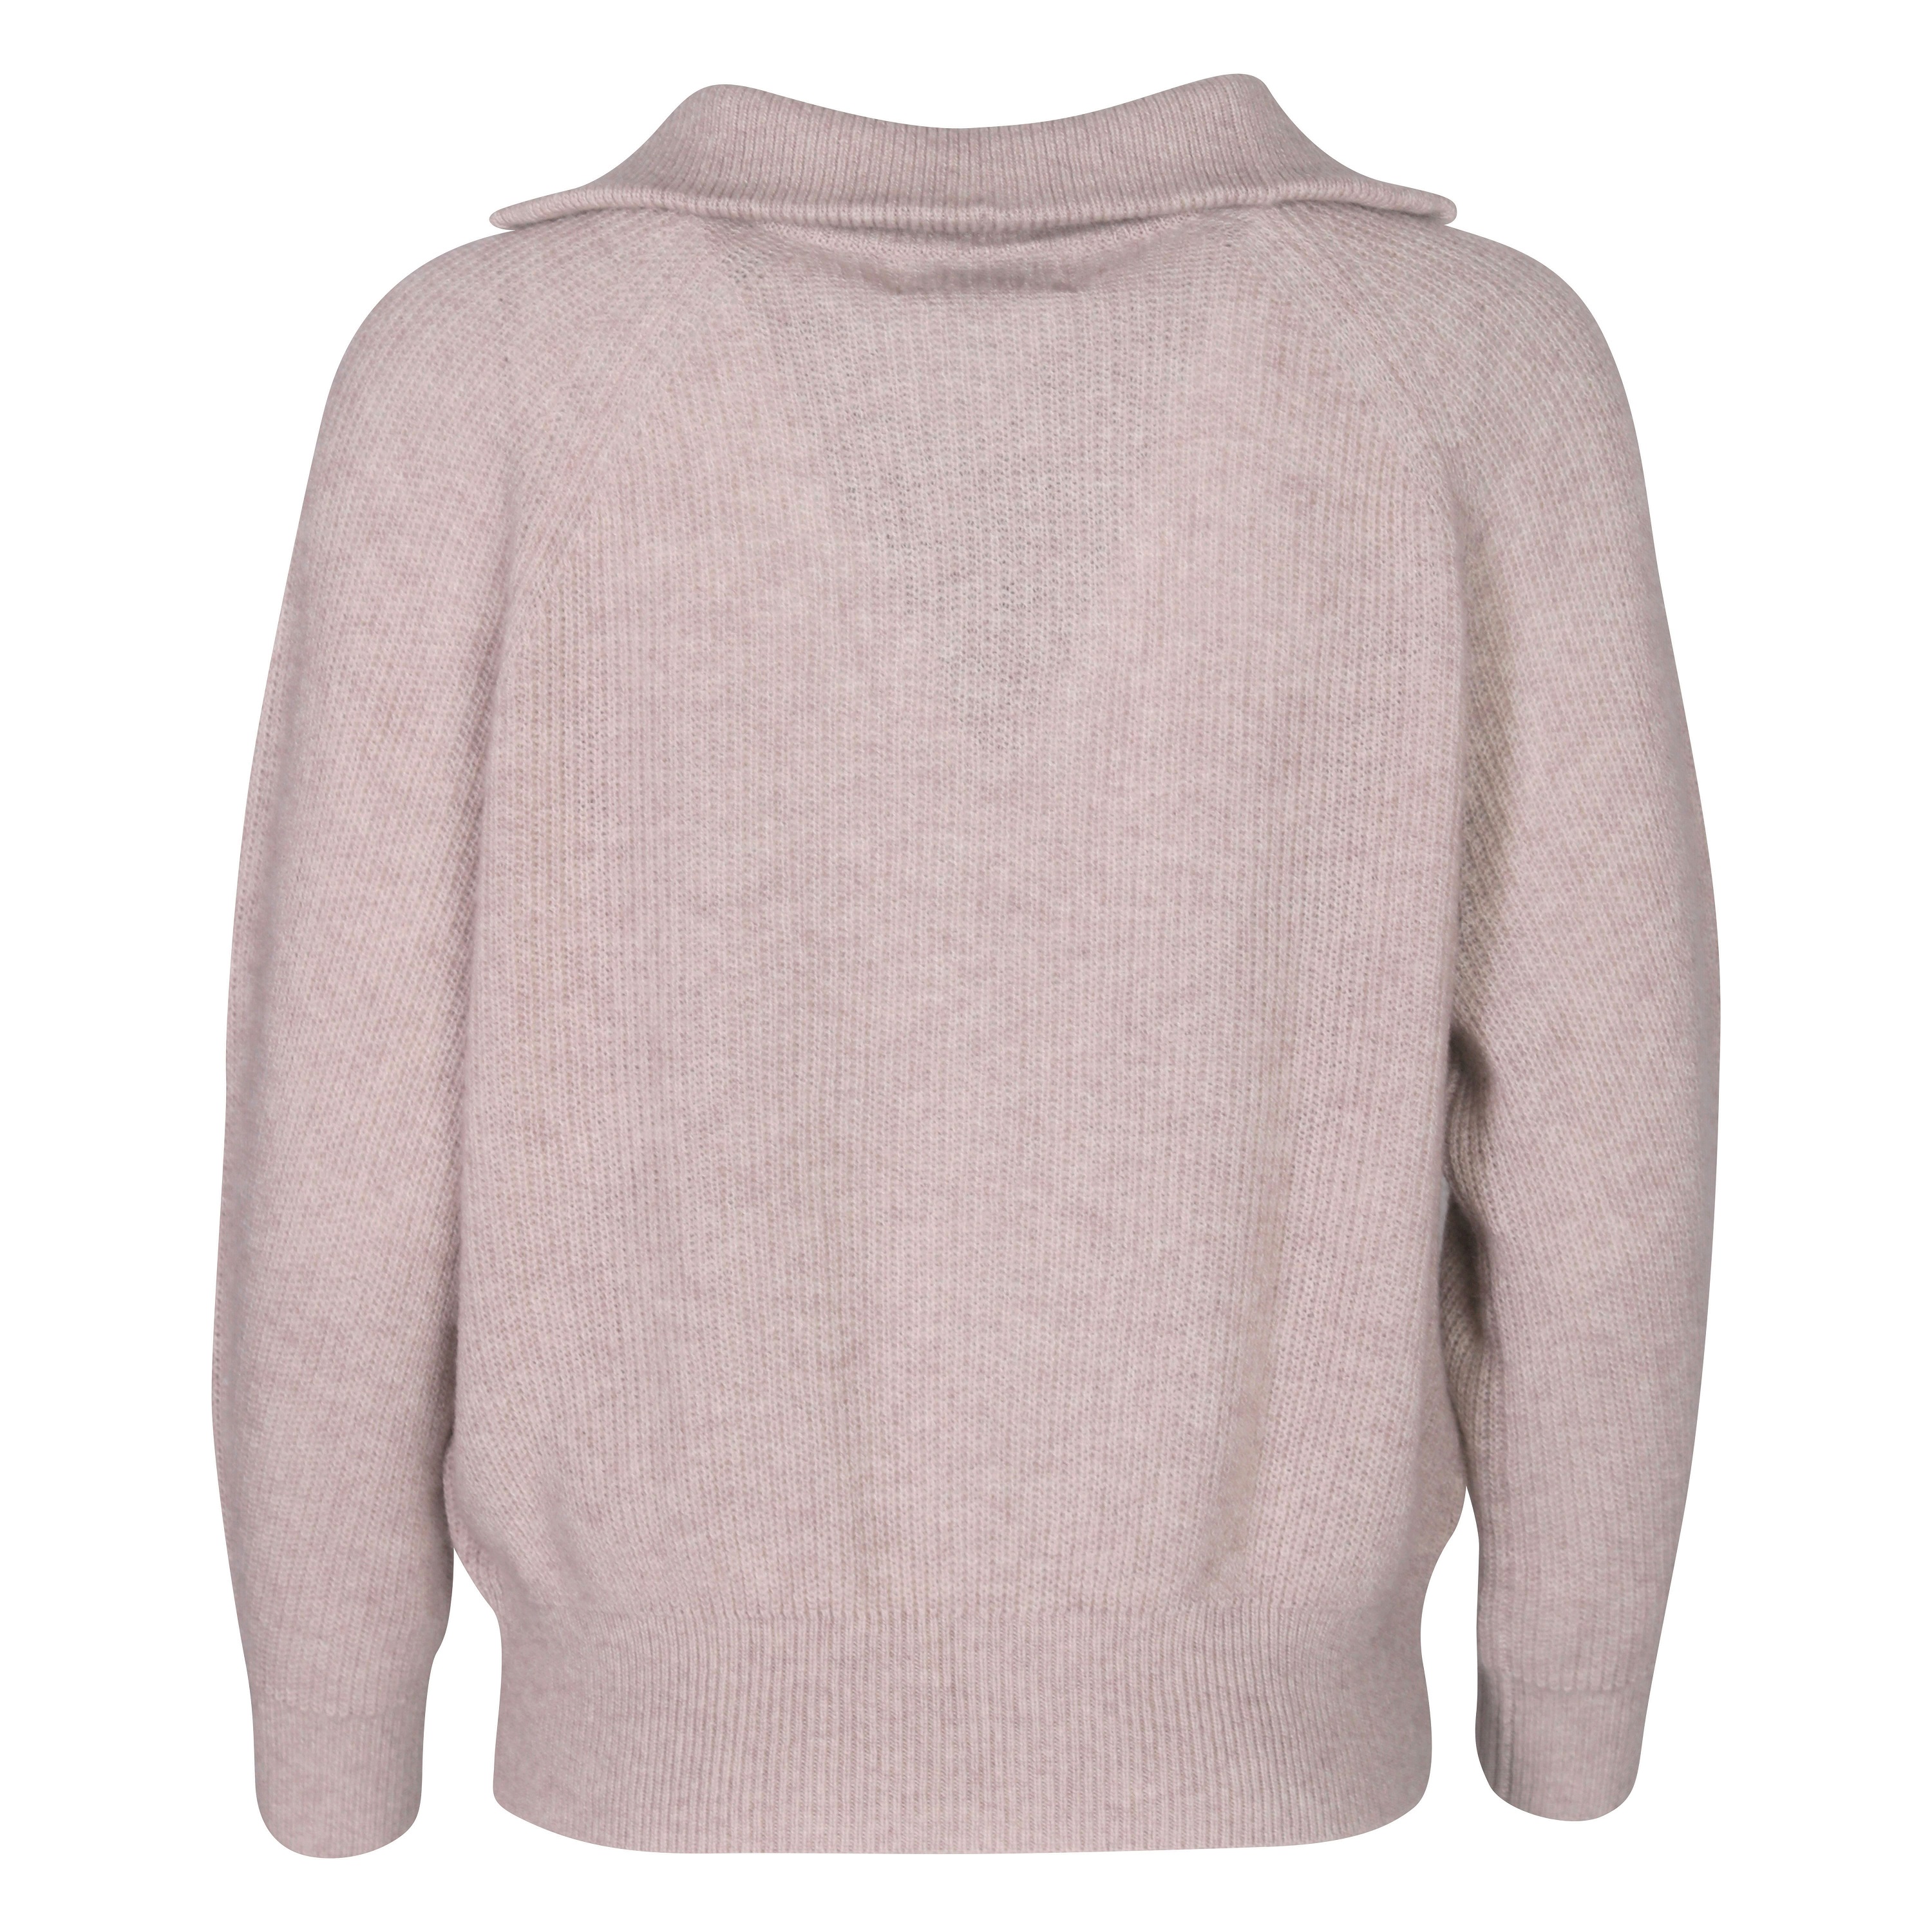 Flona Cashmere Pullover in Heather Mocha